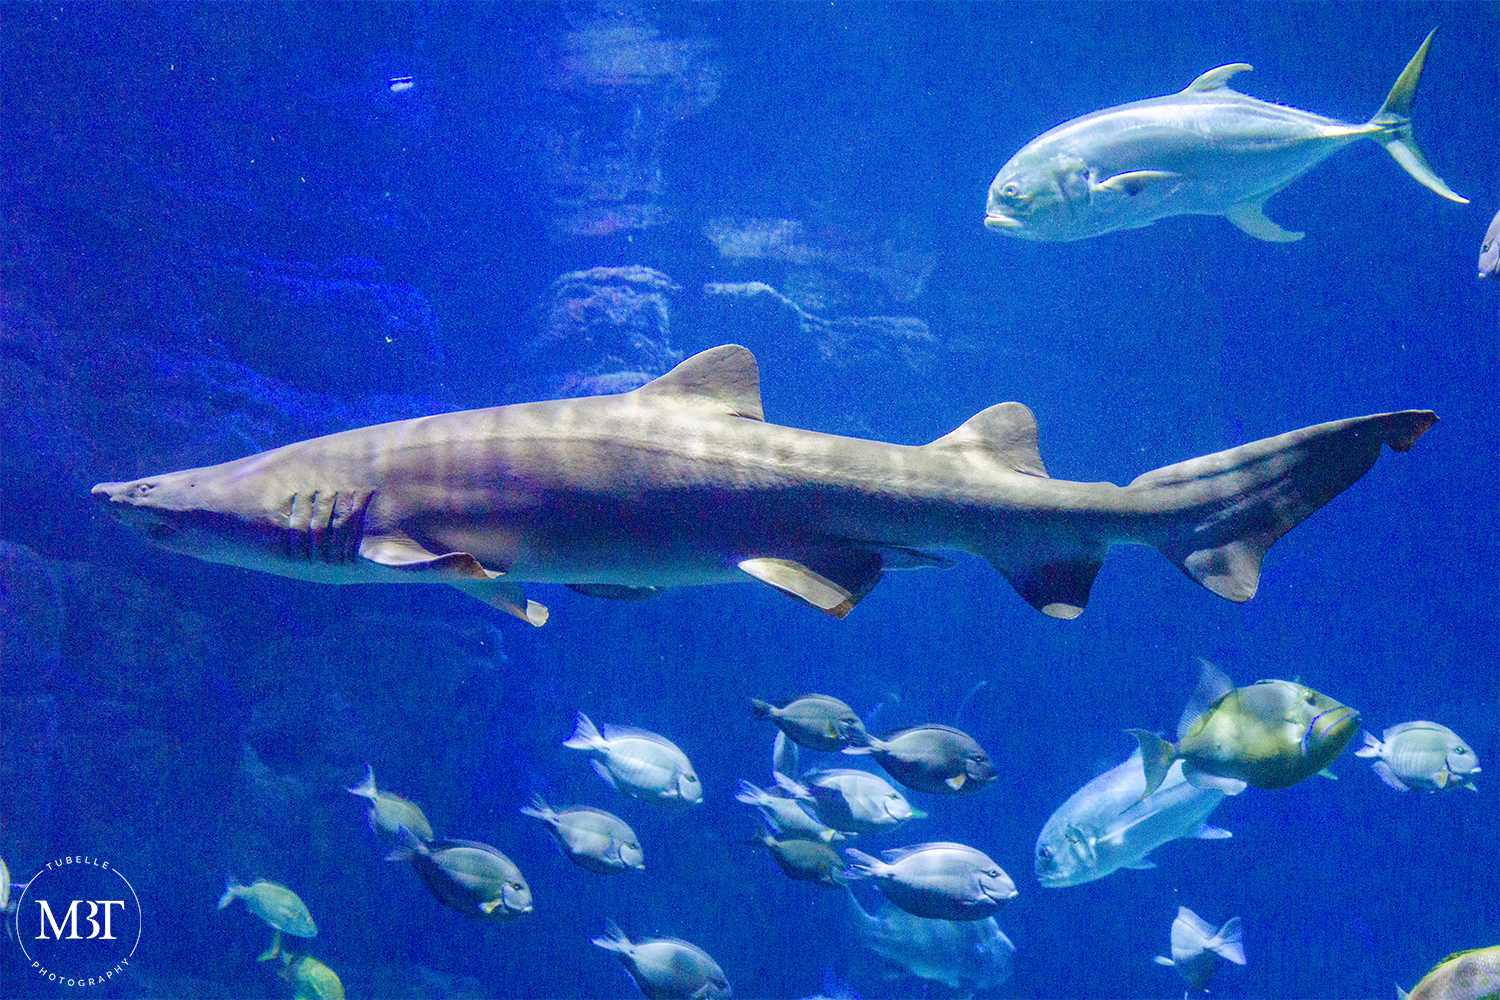 shark and fish in the aquarium, taken in Virginia Aquarium in Norfolk, Virginia by a Maryland family photographer